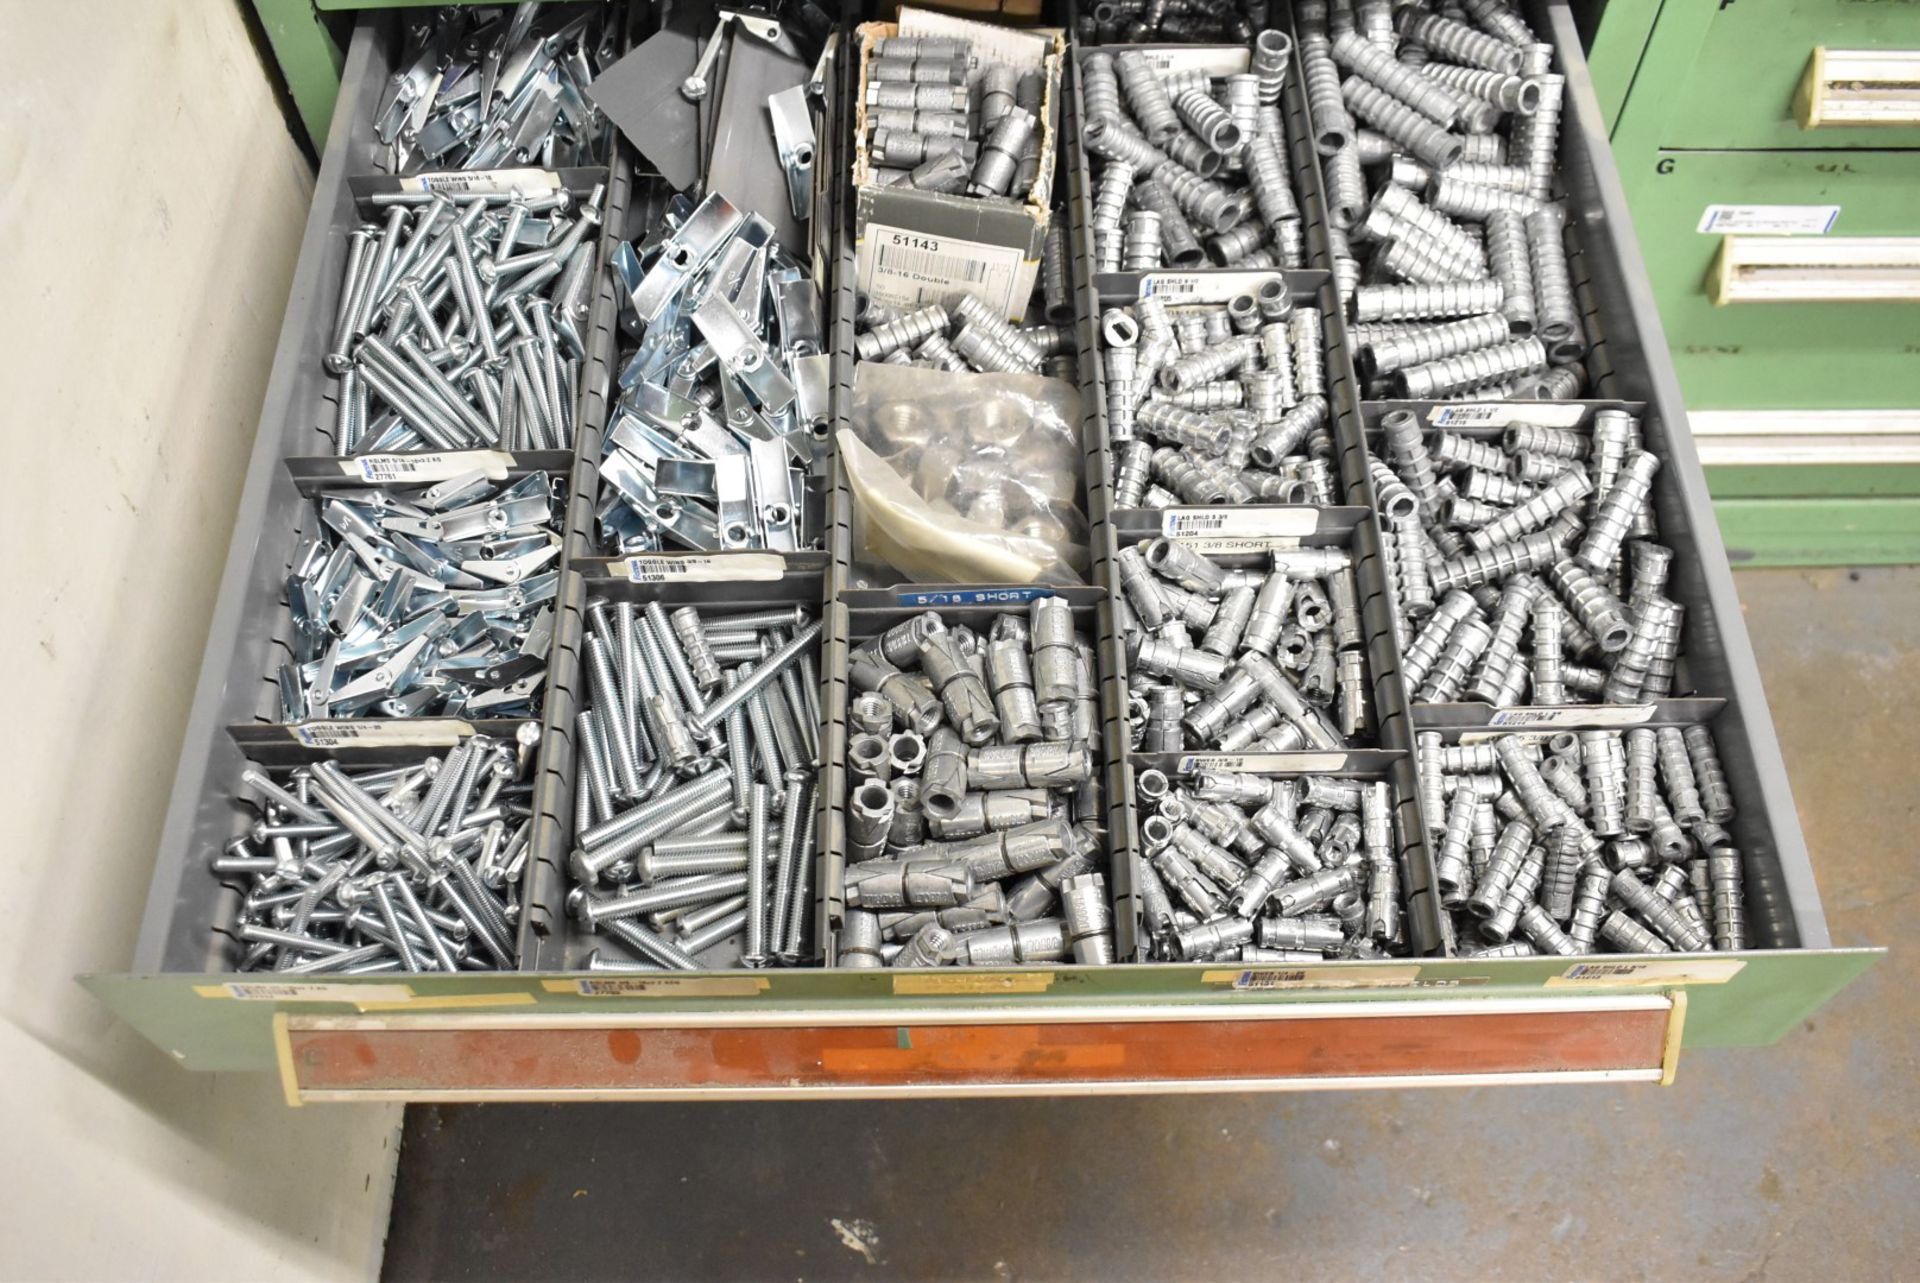 LOT/ CONTENTS OF CABINET - INCLUDING STAINLESS STEEL HARDWARE, HARDWARE, SET SCREWS (TOOL CABINET - Image 7 of 9